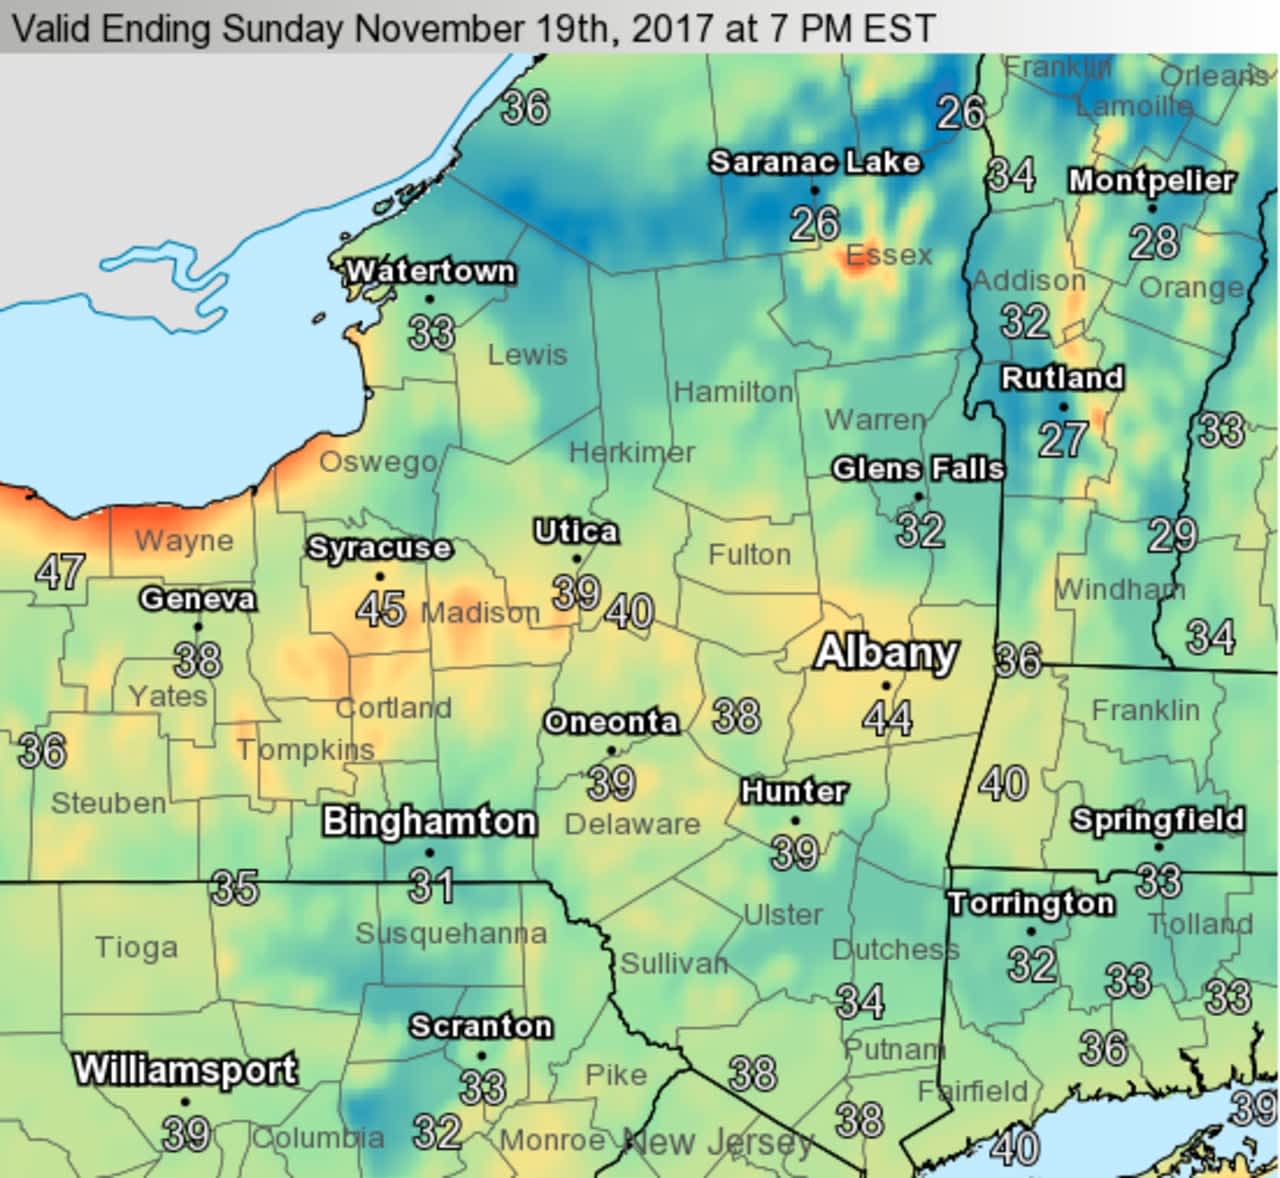 A look at projected maximum wind gusts expected through early Sunday evening.